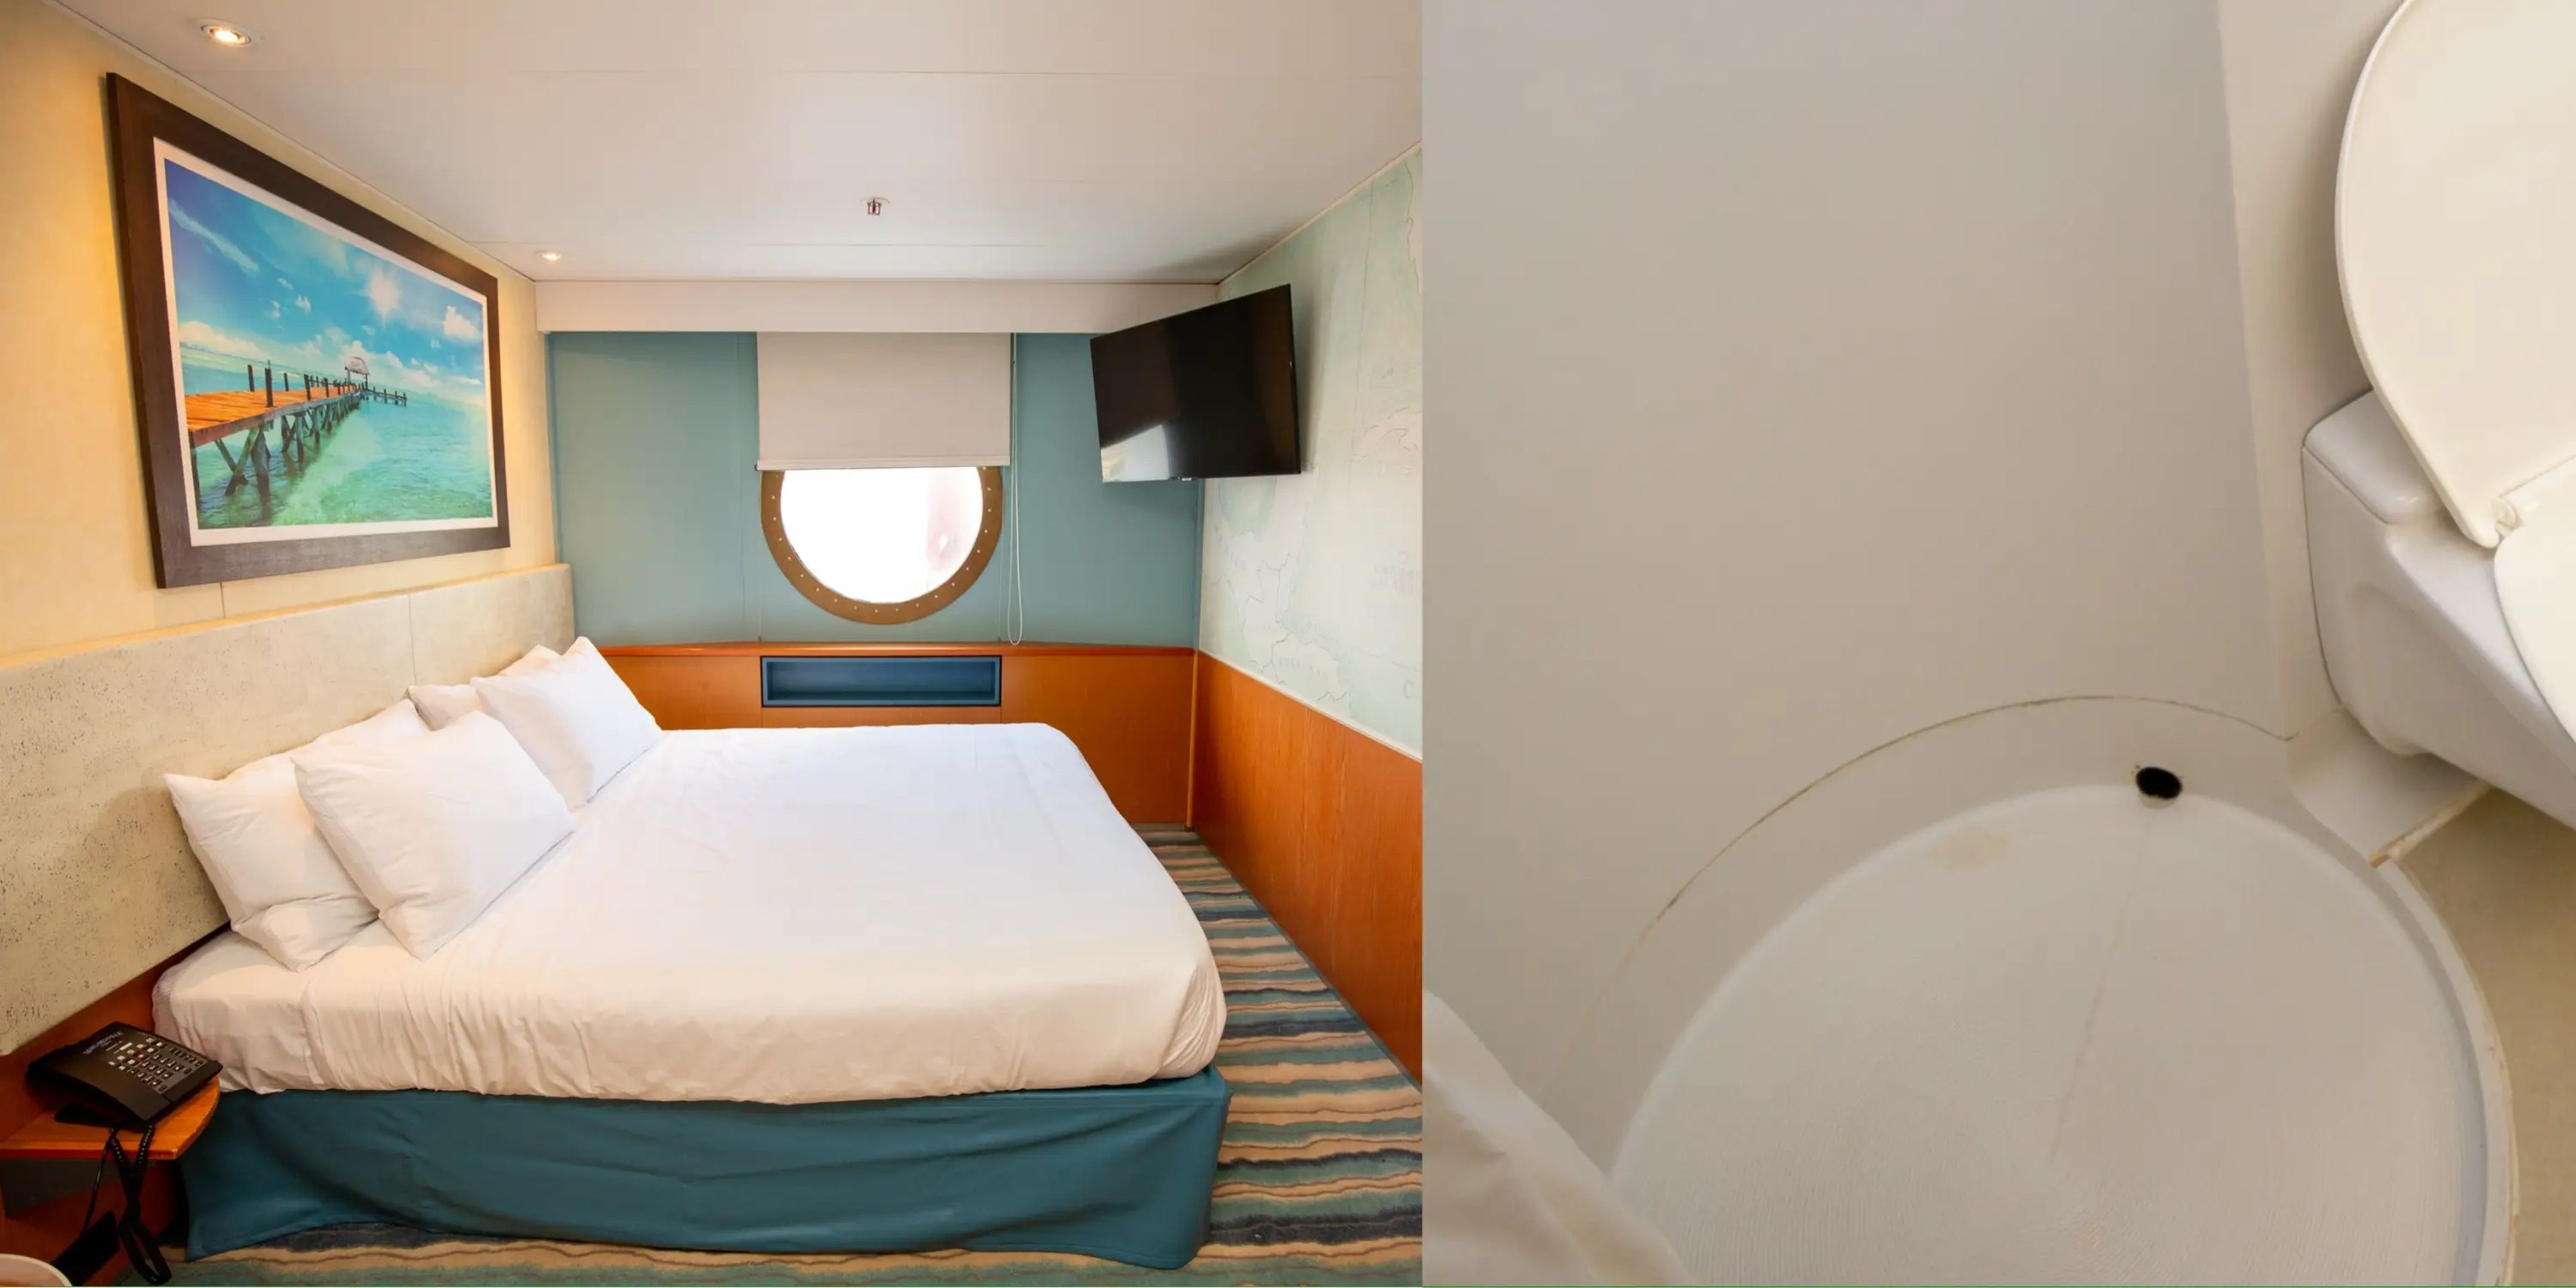 My bedroom and bathroom on the Margaritaville cruise